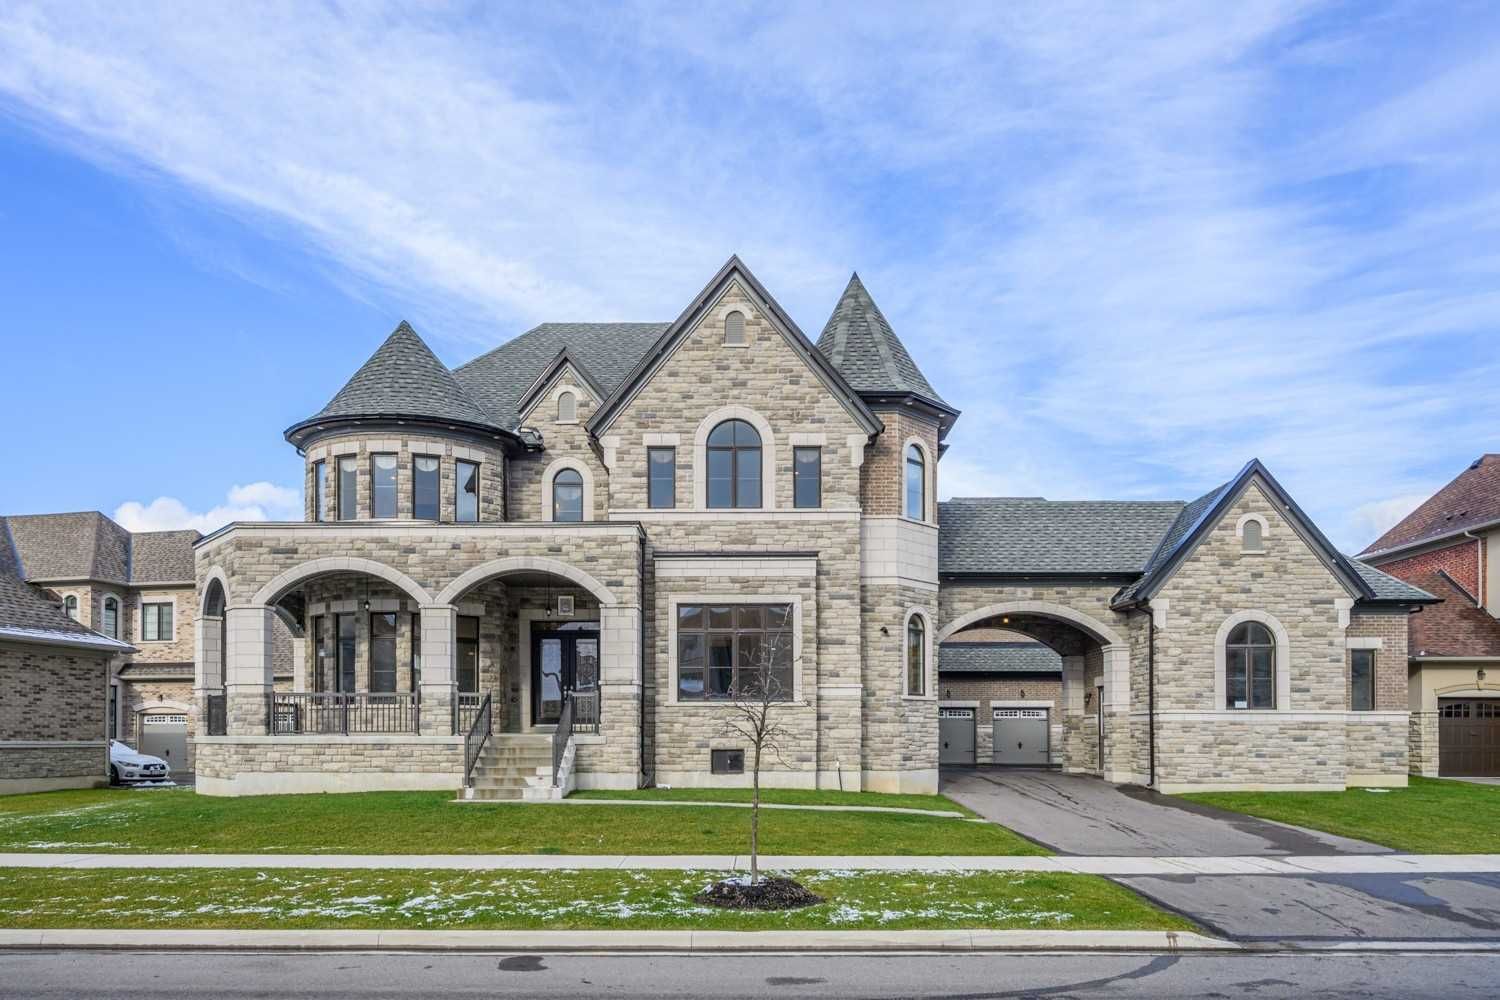 Hire a Real Estate Agent for House for Sale in Kleinburg: